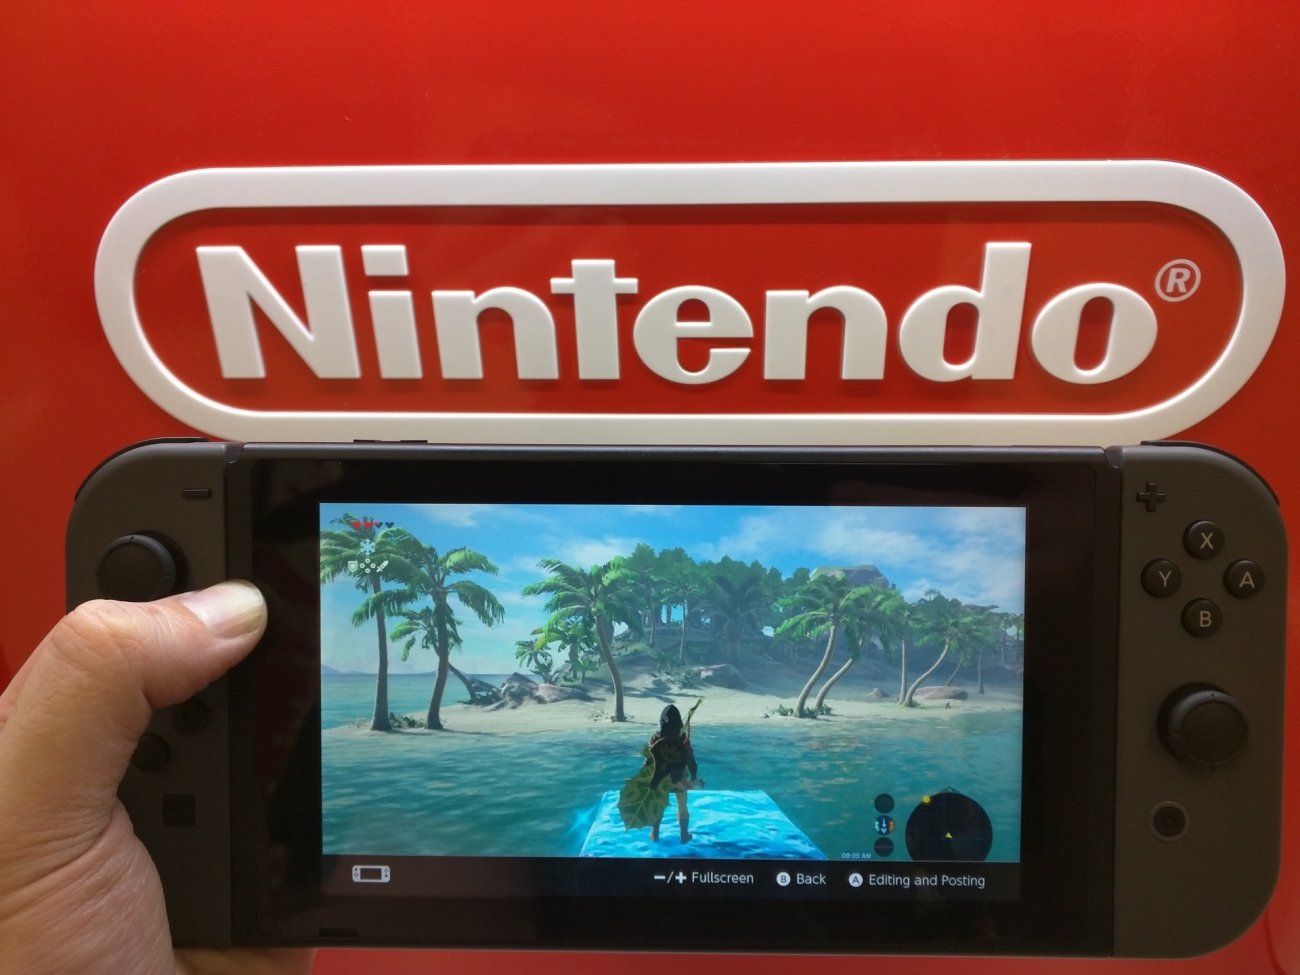 nintendo switch console at target